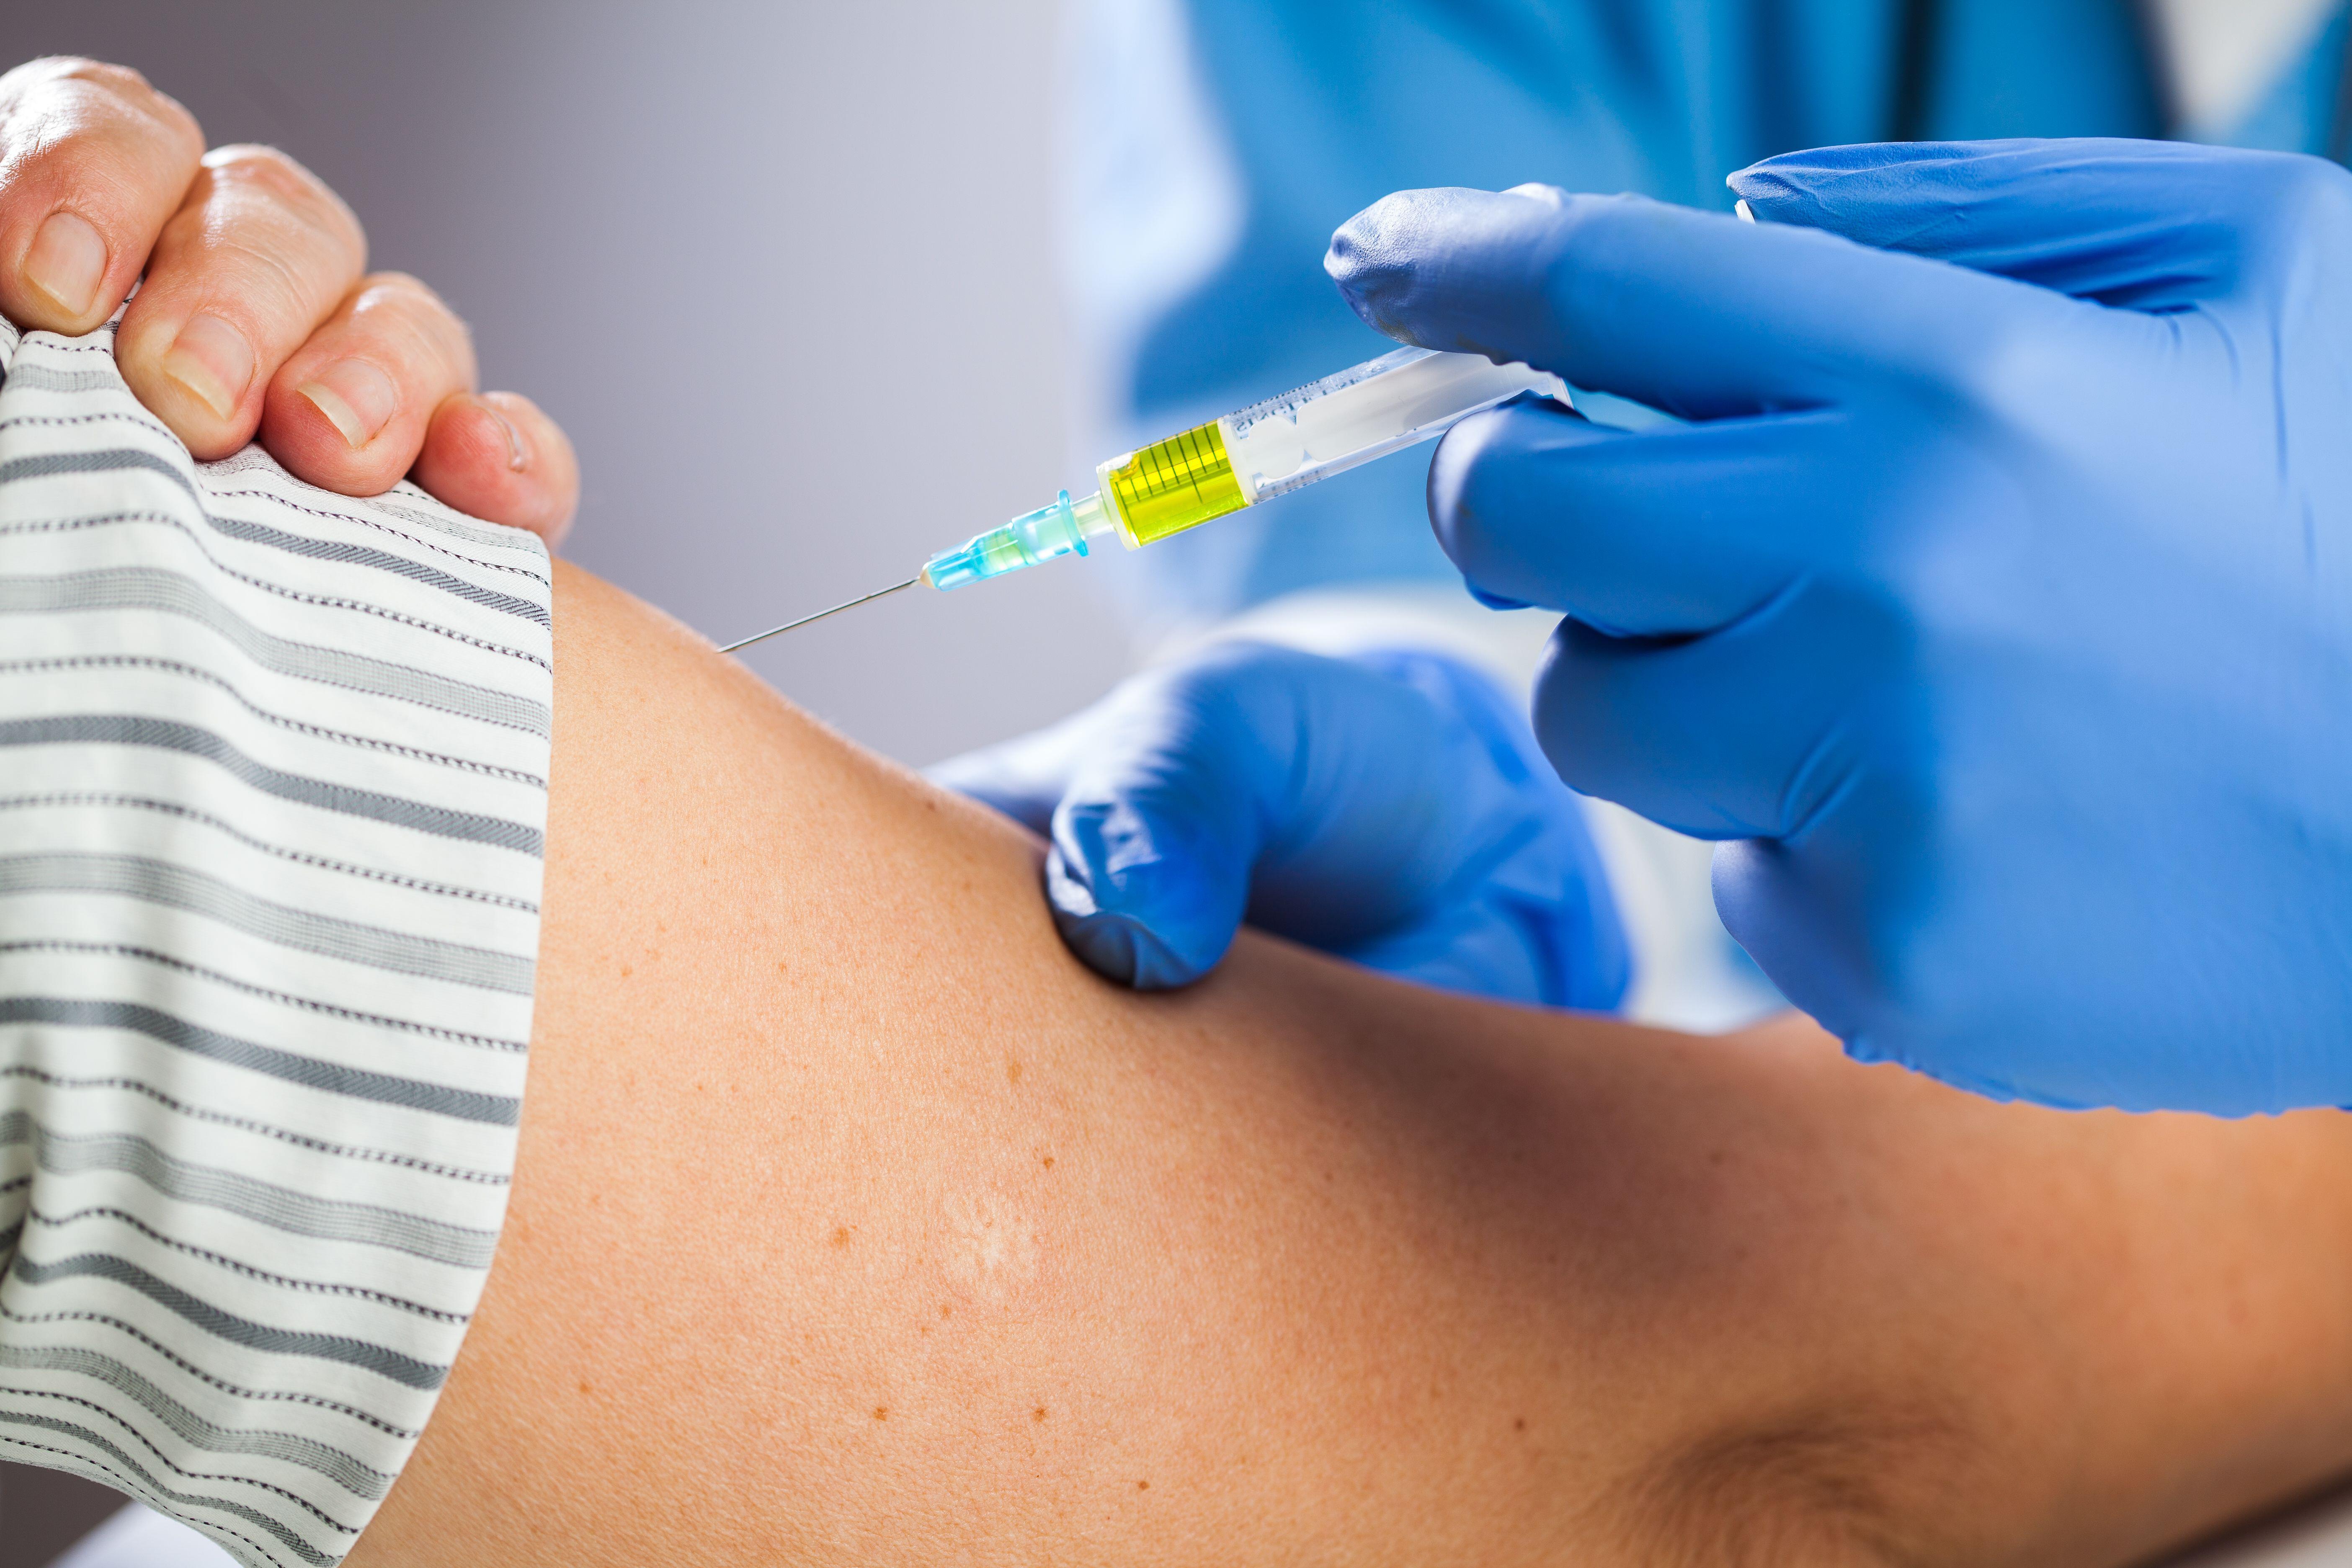 Keep on top of your Covid vaccine jabs, doctors advise